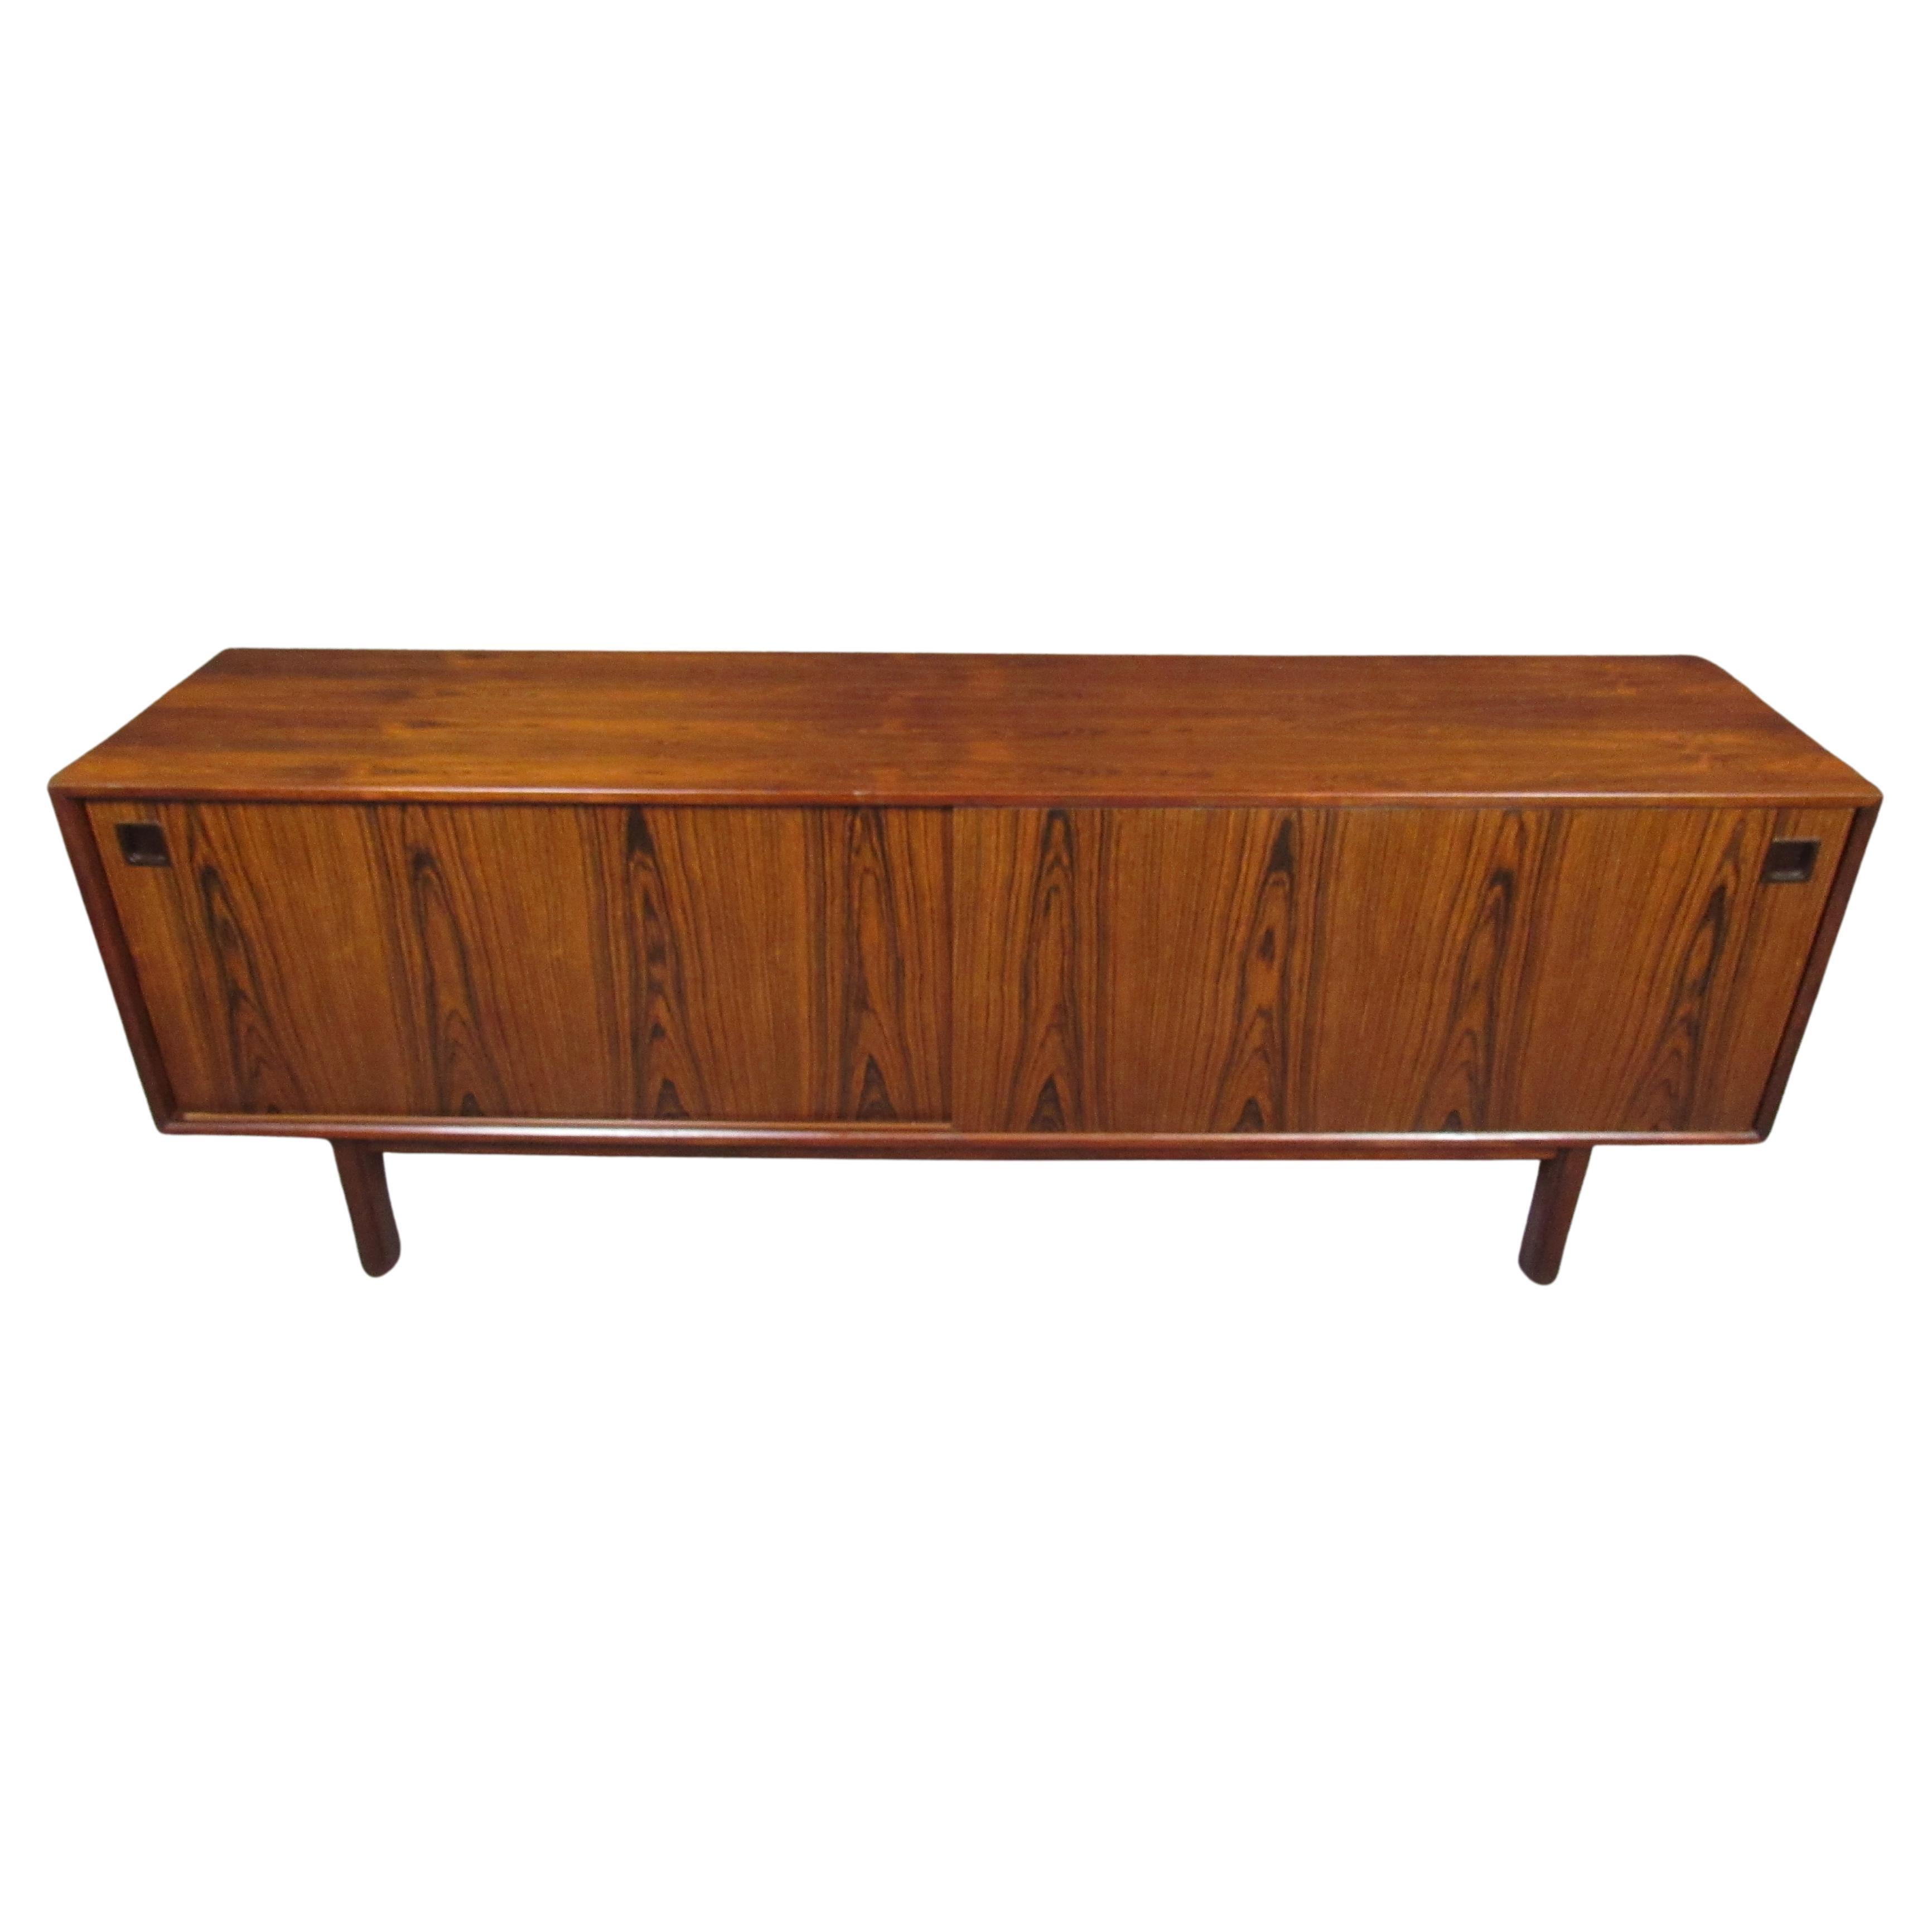 In any room, you'll lose yourself in the spectacular rosewood grain of this truly impressive 